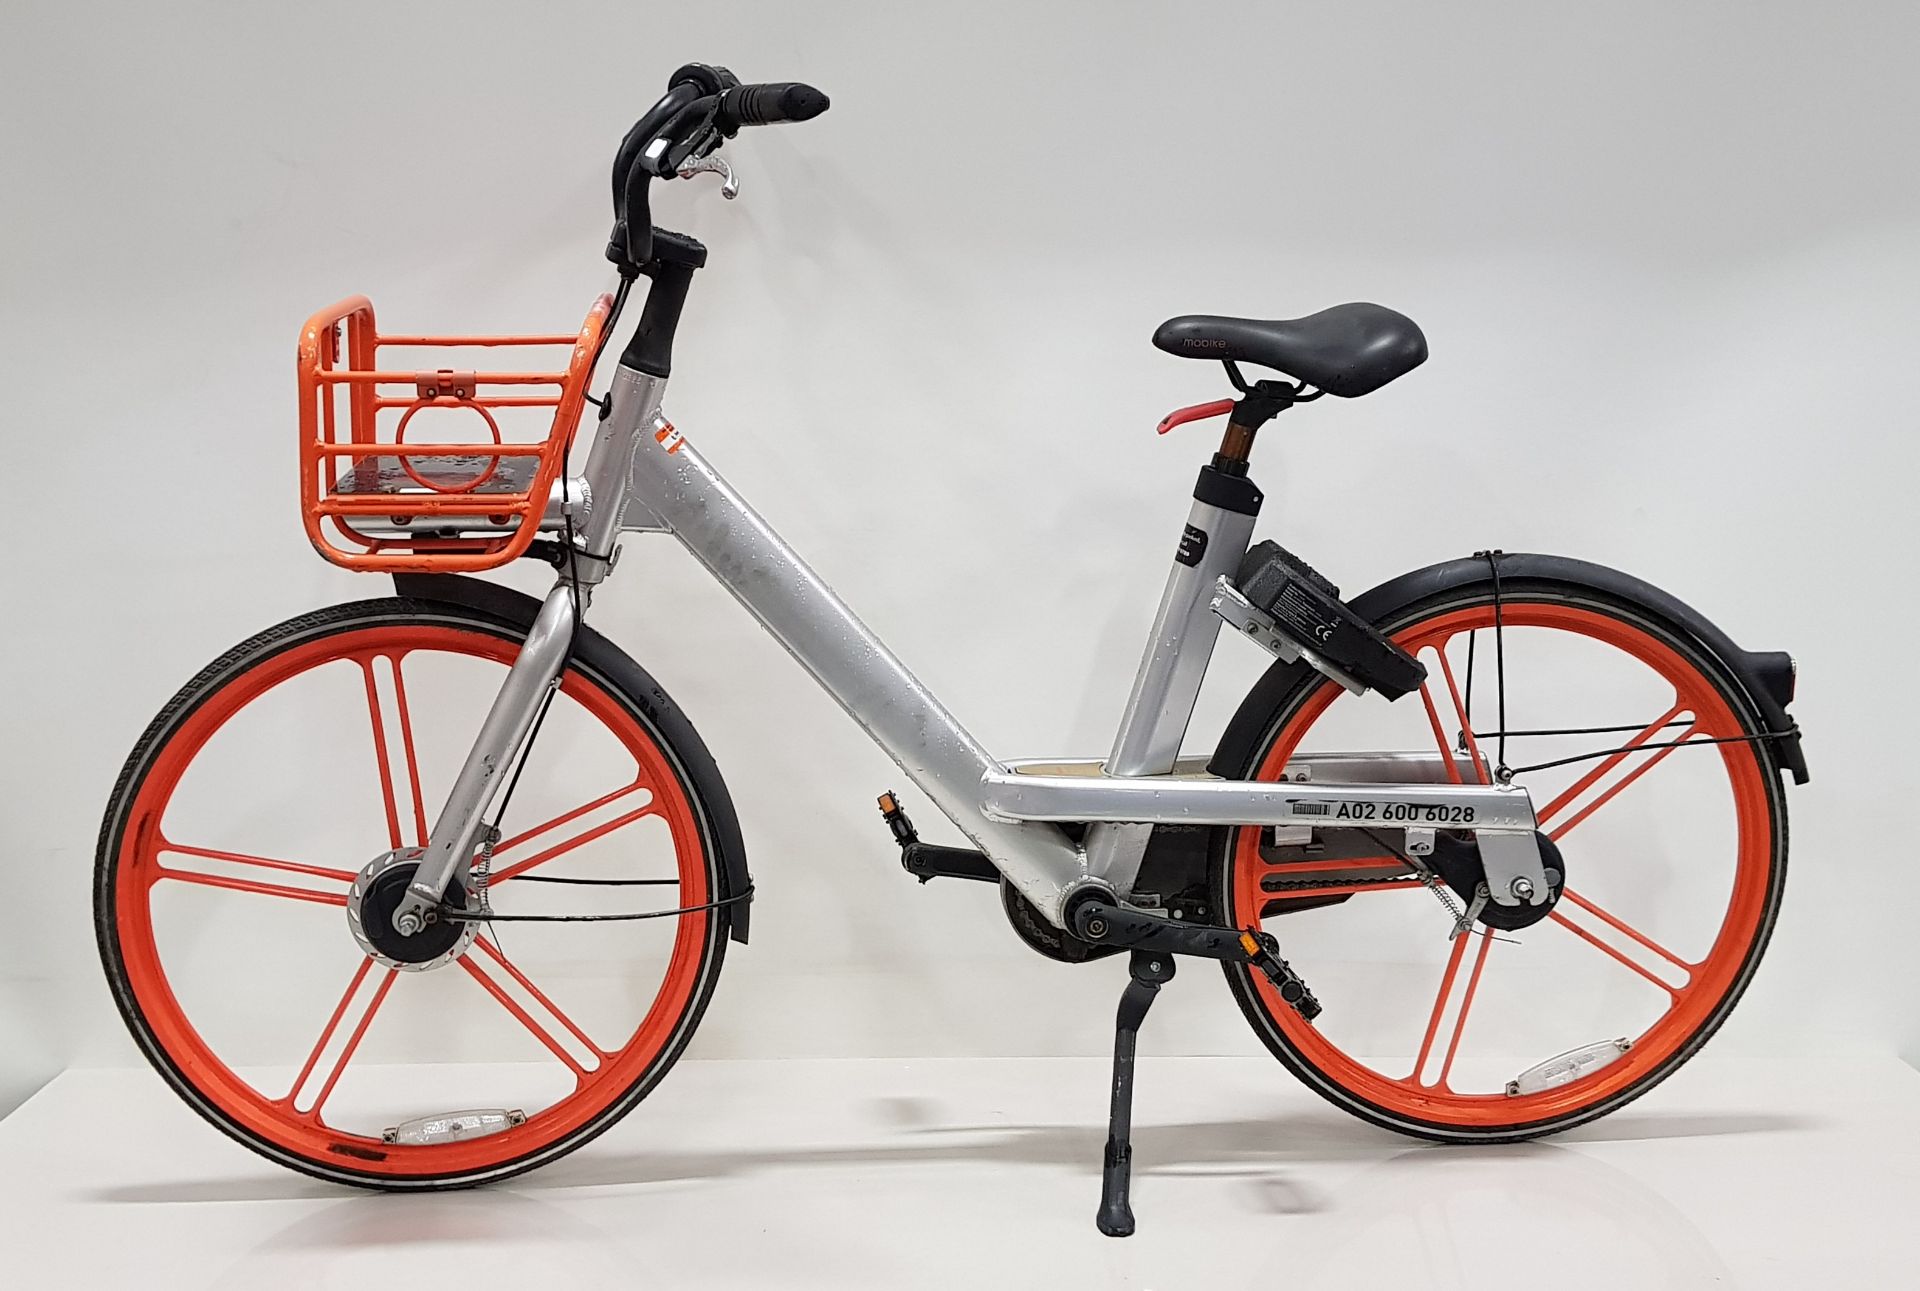 CITY / CAMPING BICYCLE - ROBUST ALUMINIUM 19 X 48 FRAME, SOLID PUNCTURE PROOF 24 TYRES, DYNAMO BUILT